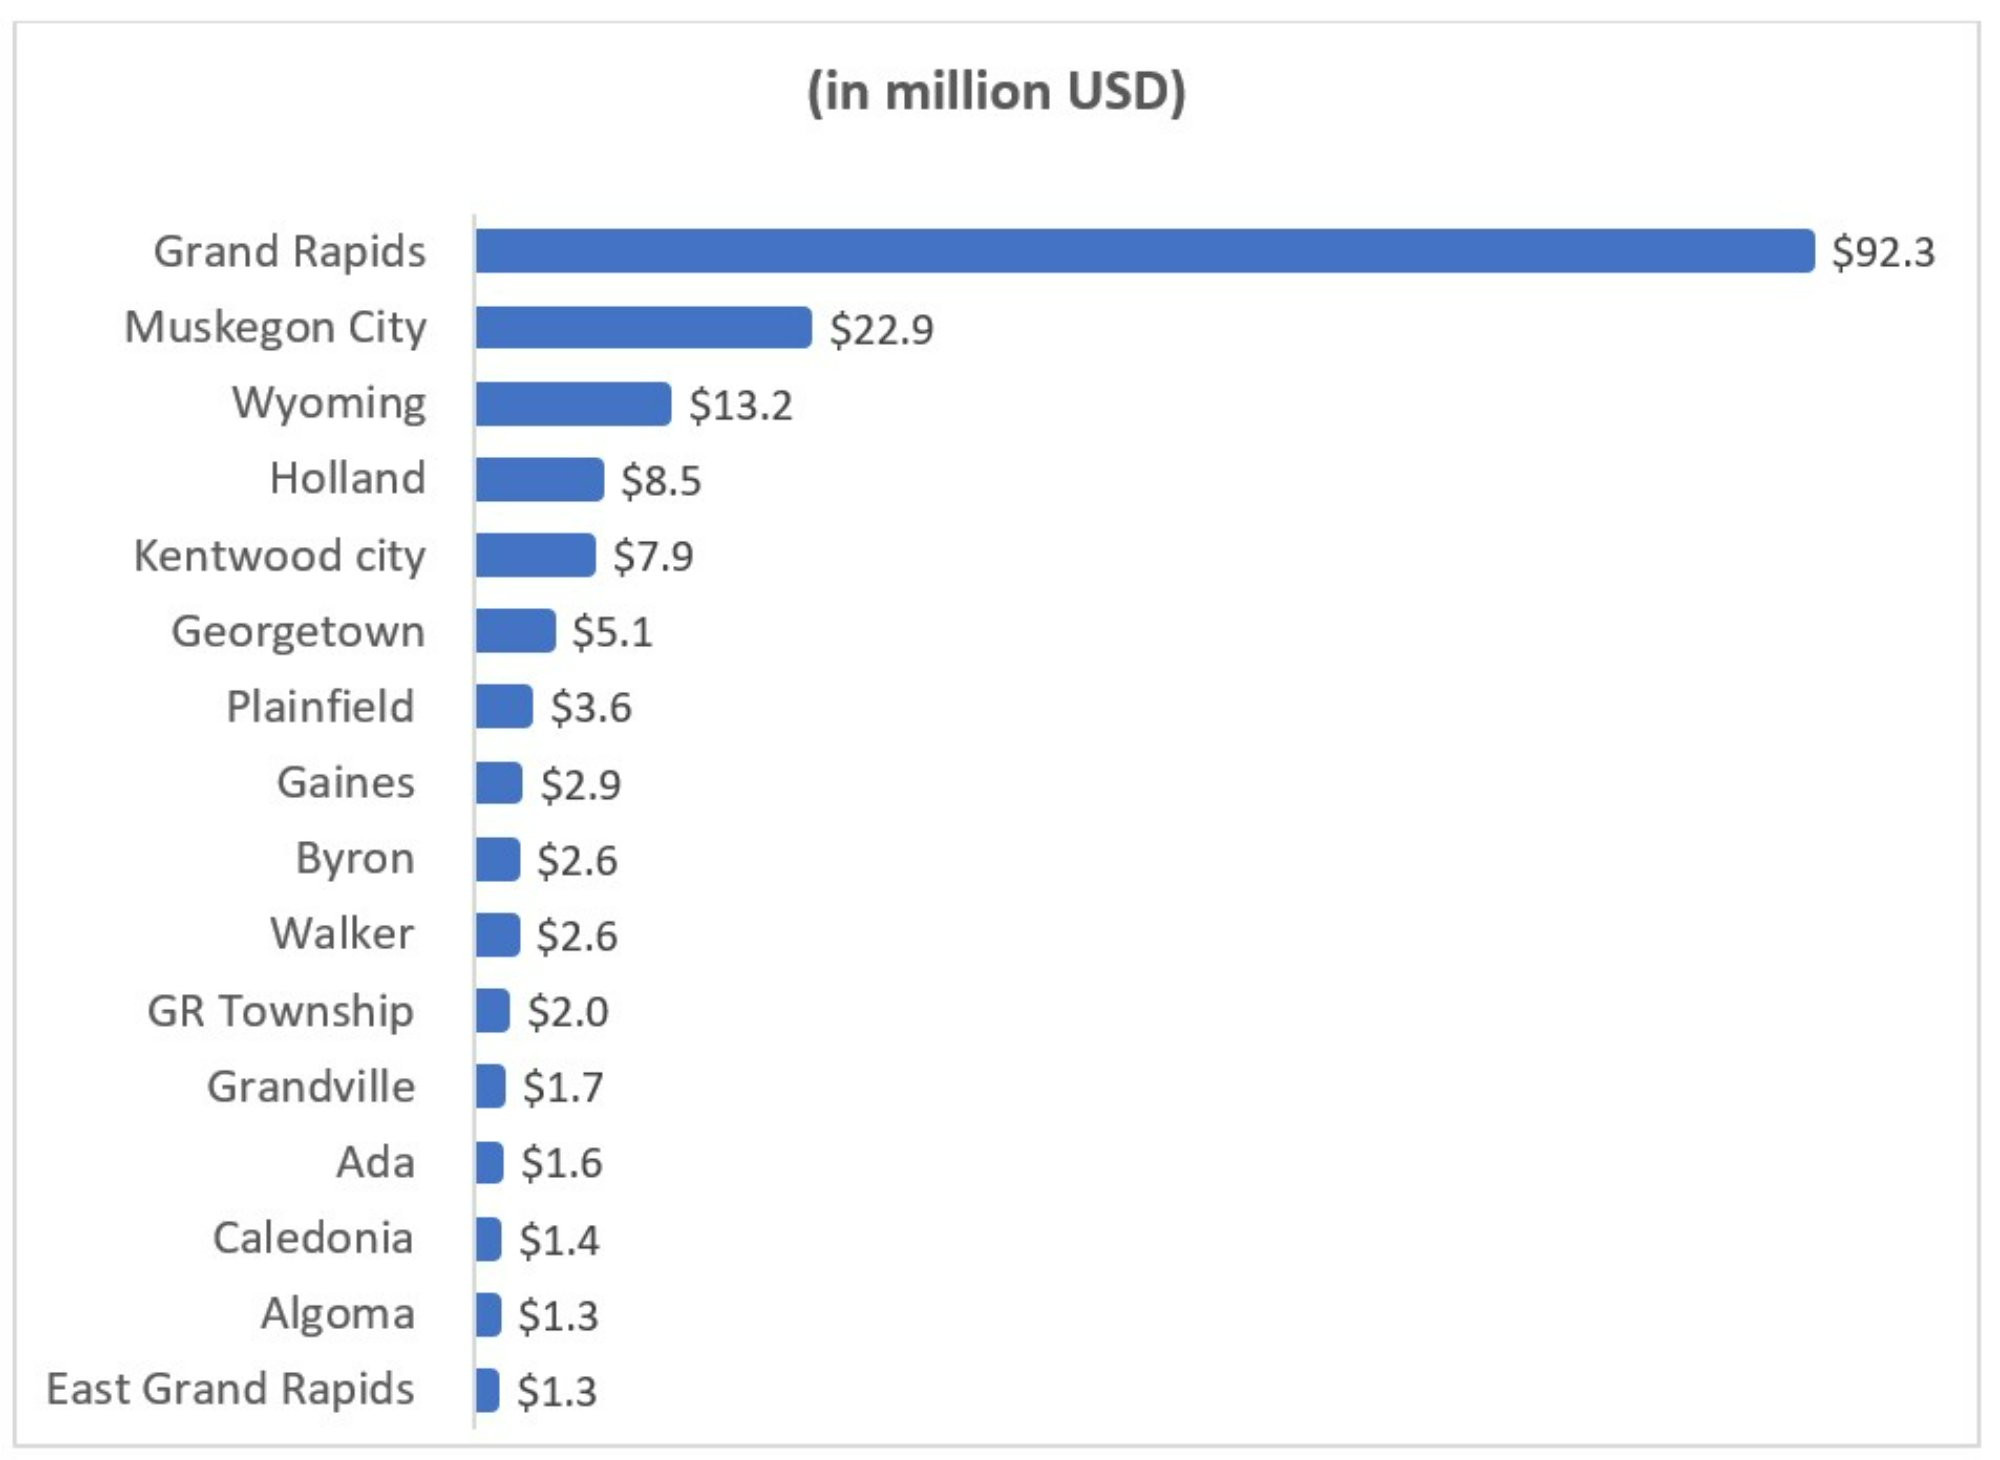 ARPA funds allocated (In million USD) by West Michigan Municipalities